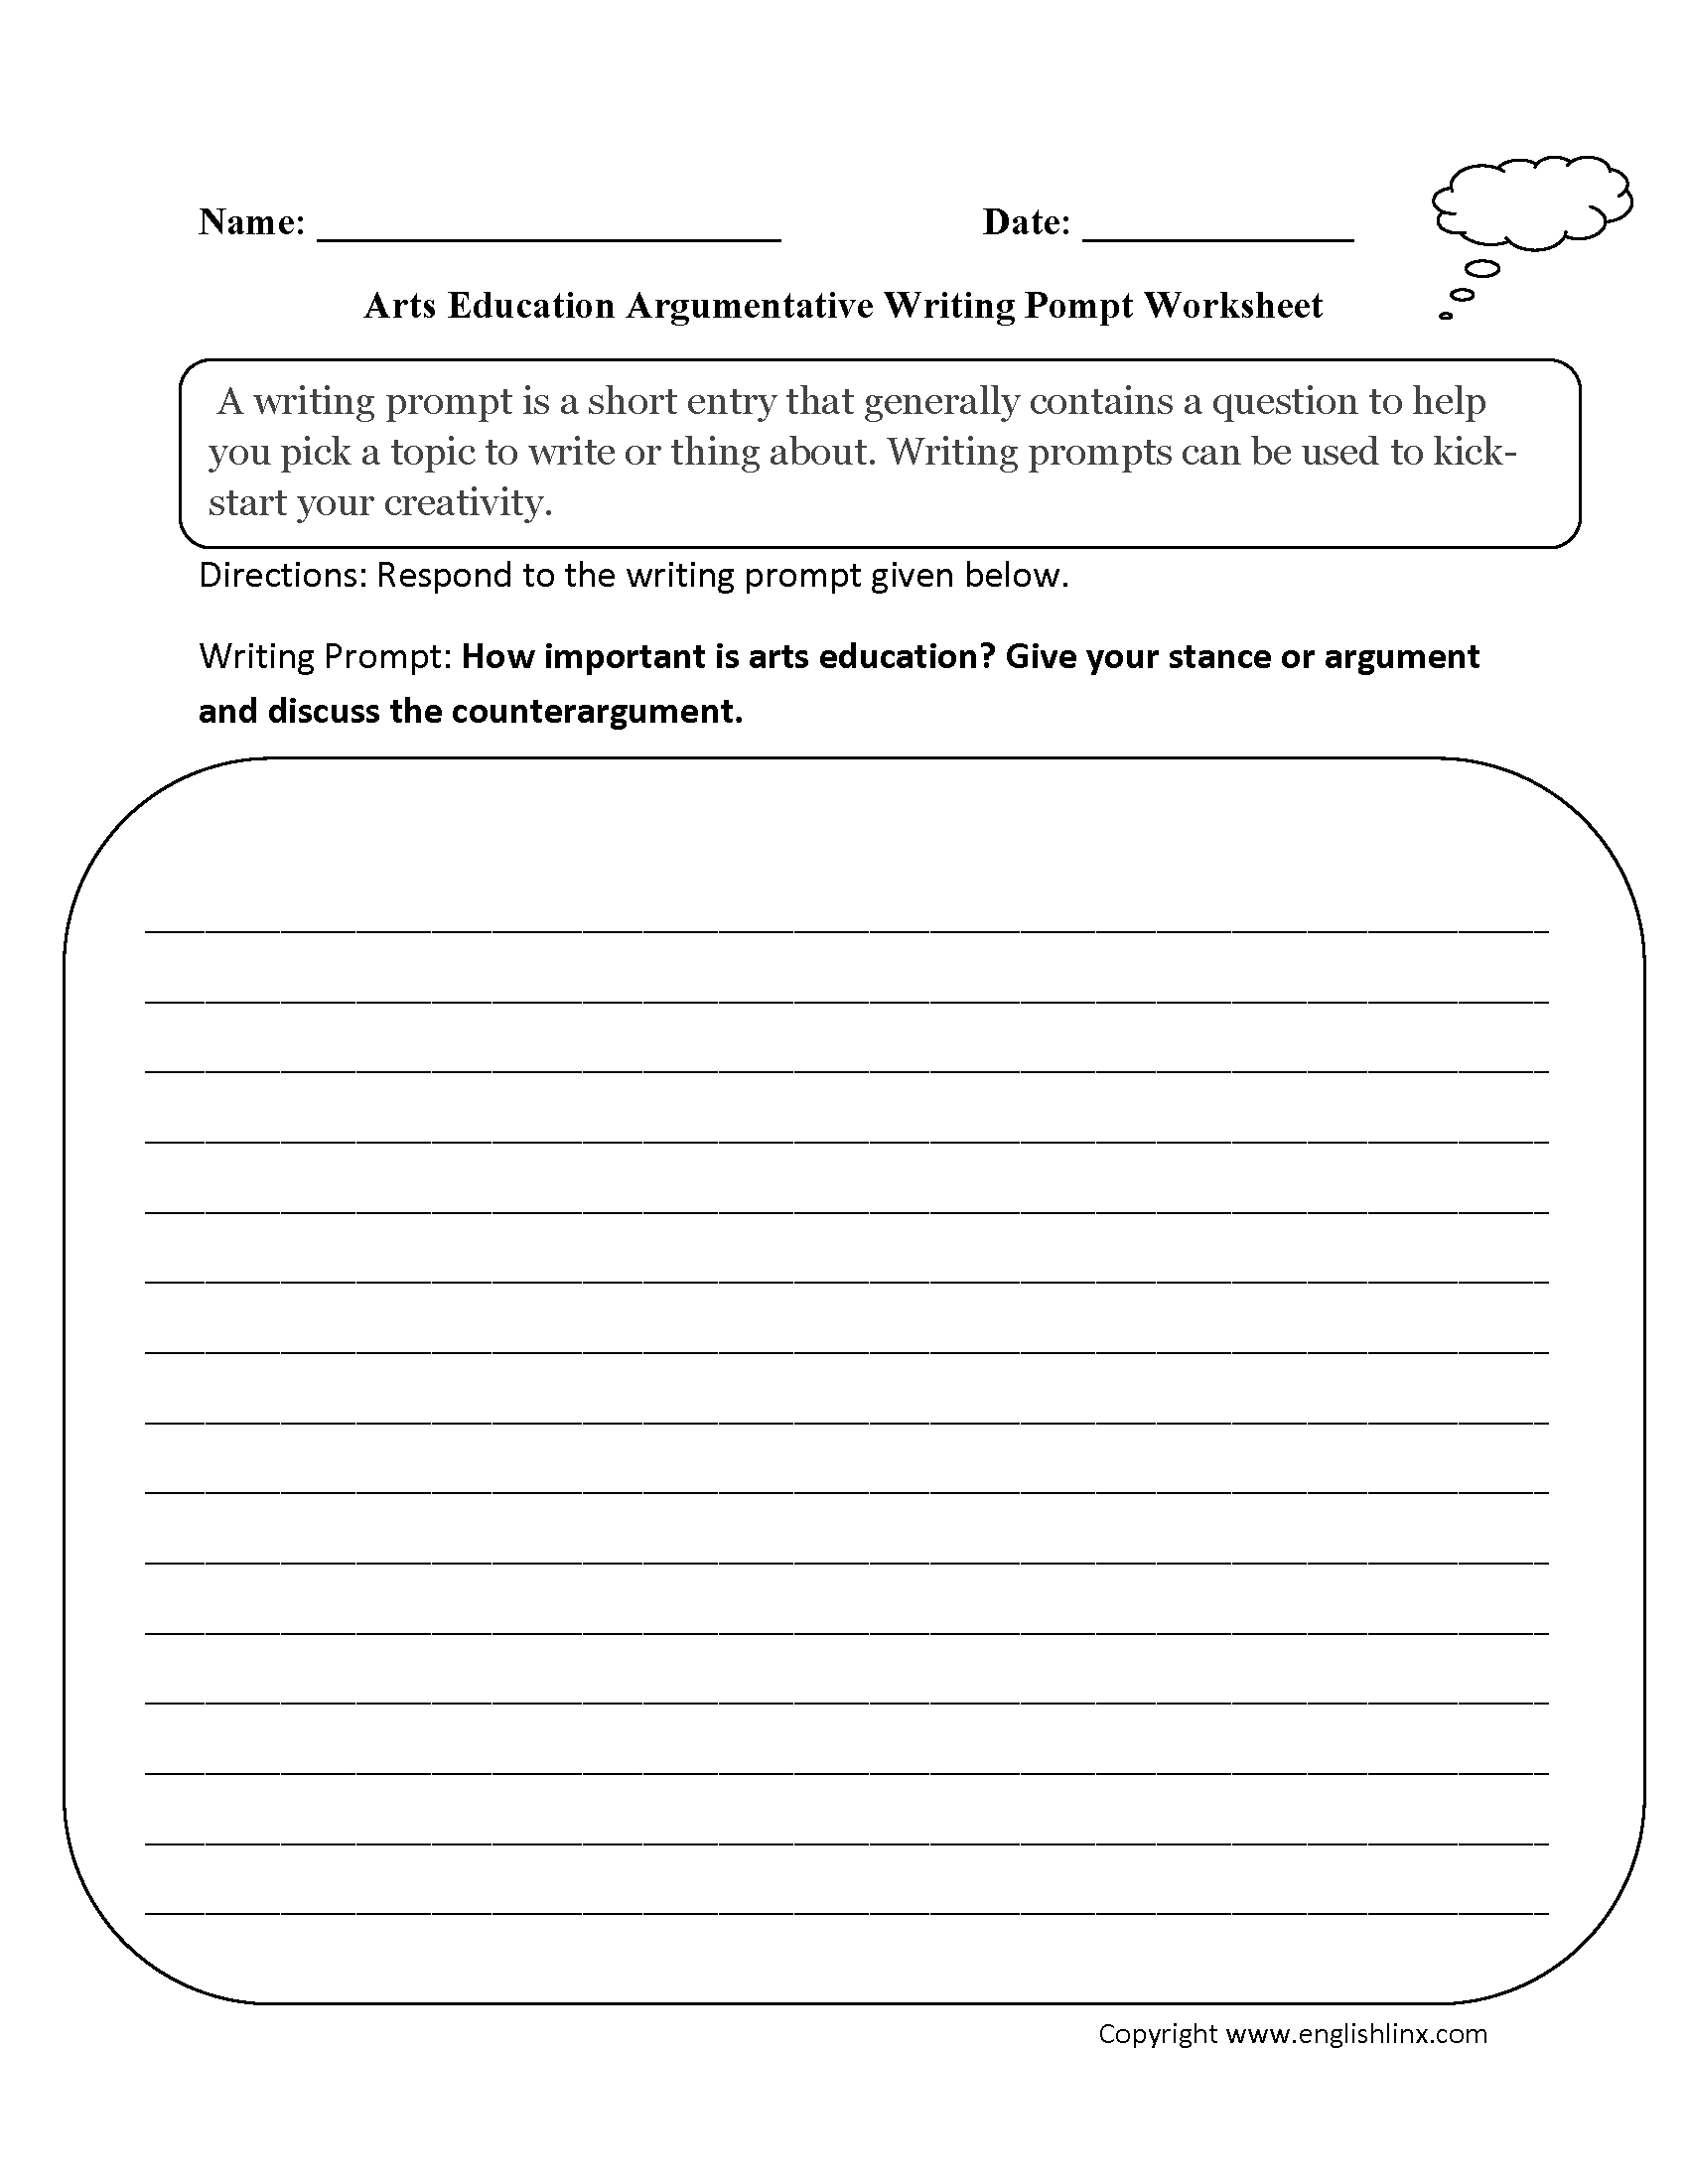 Englishlinx | Writing Prompts Worksheets - Free Printable Writing Prompts For Middle School